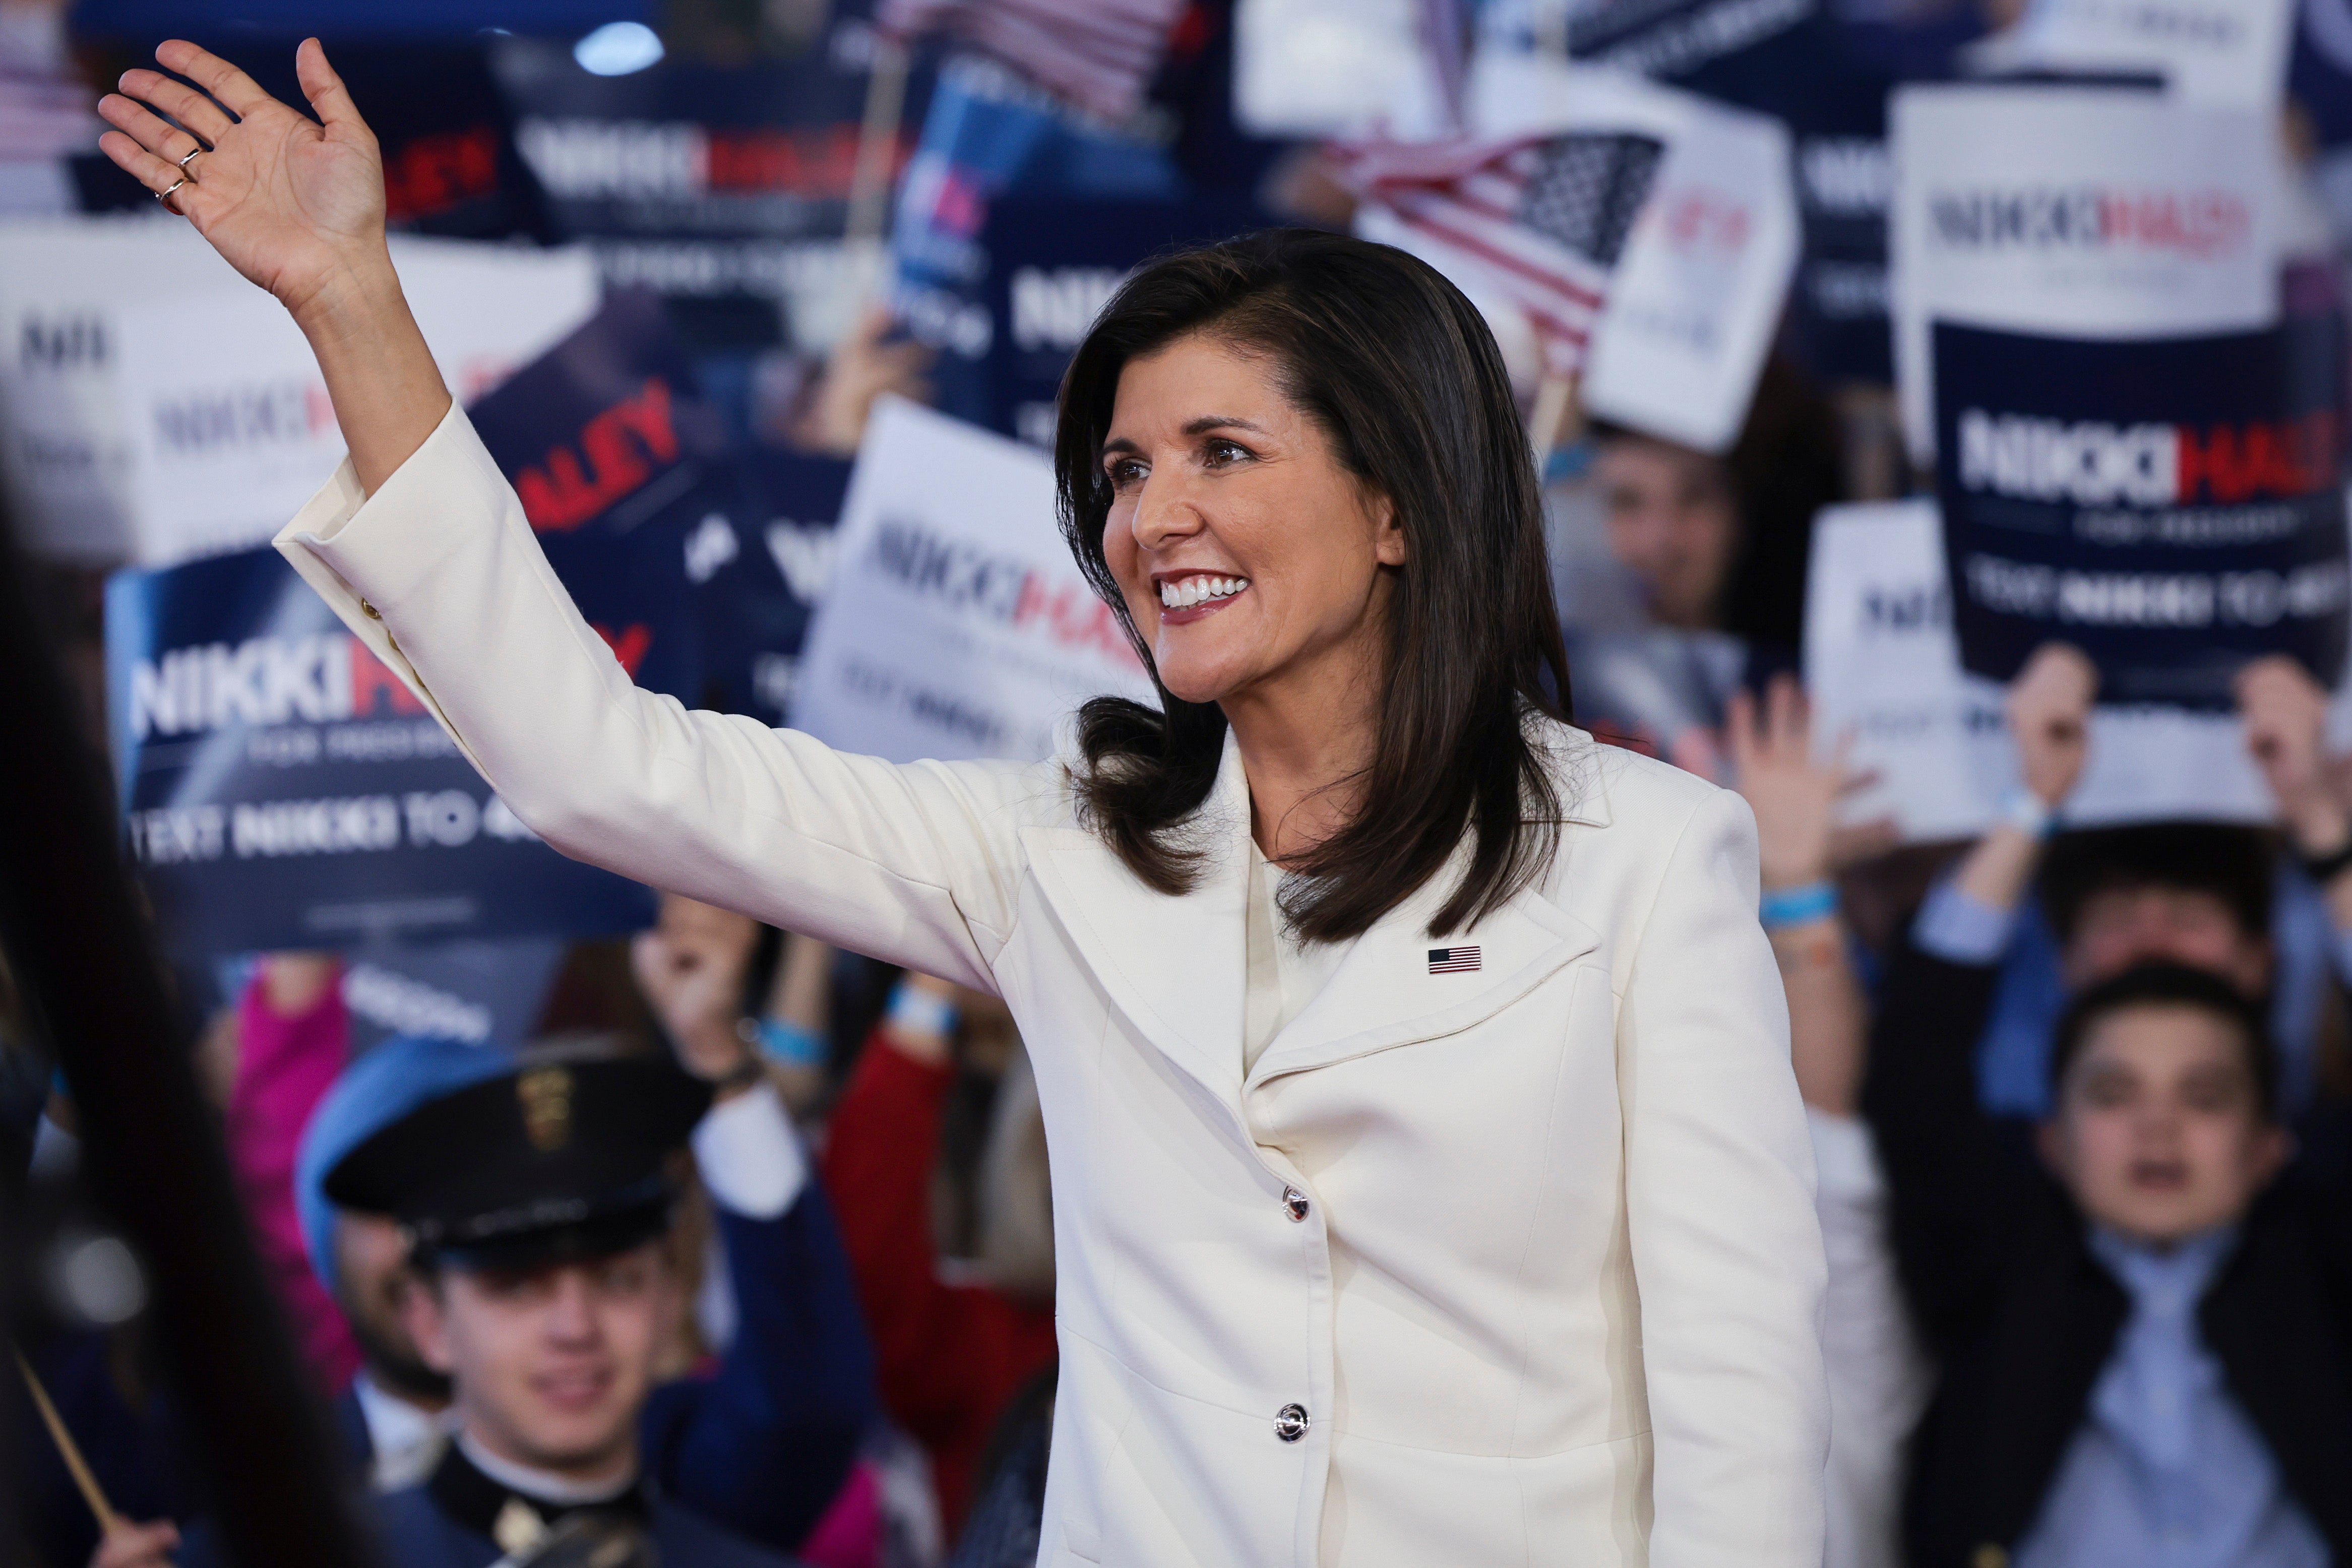 Nikki Haley vs Donald Trump Can big name donors get her to first place